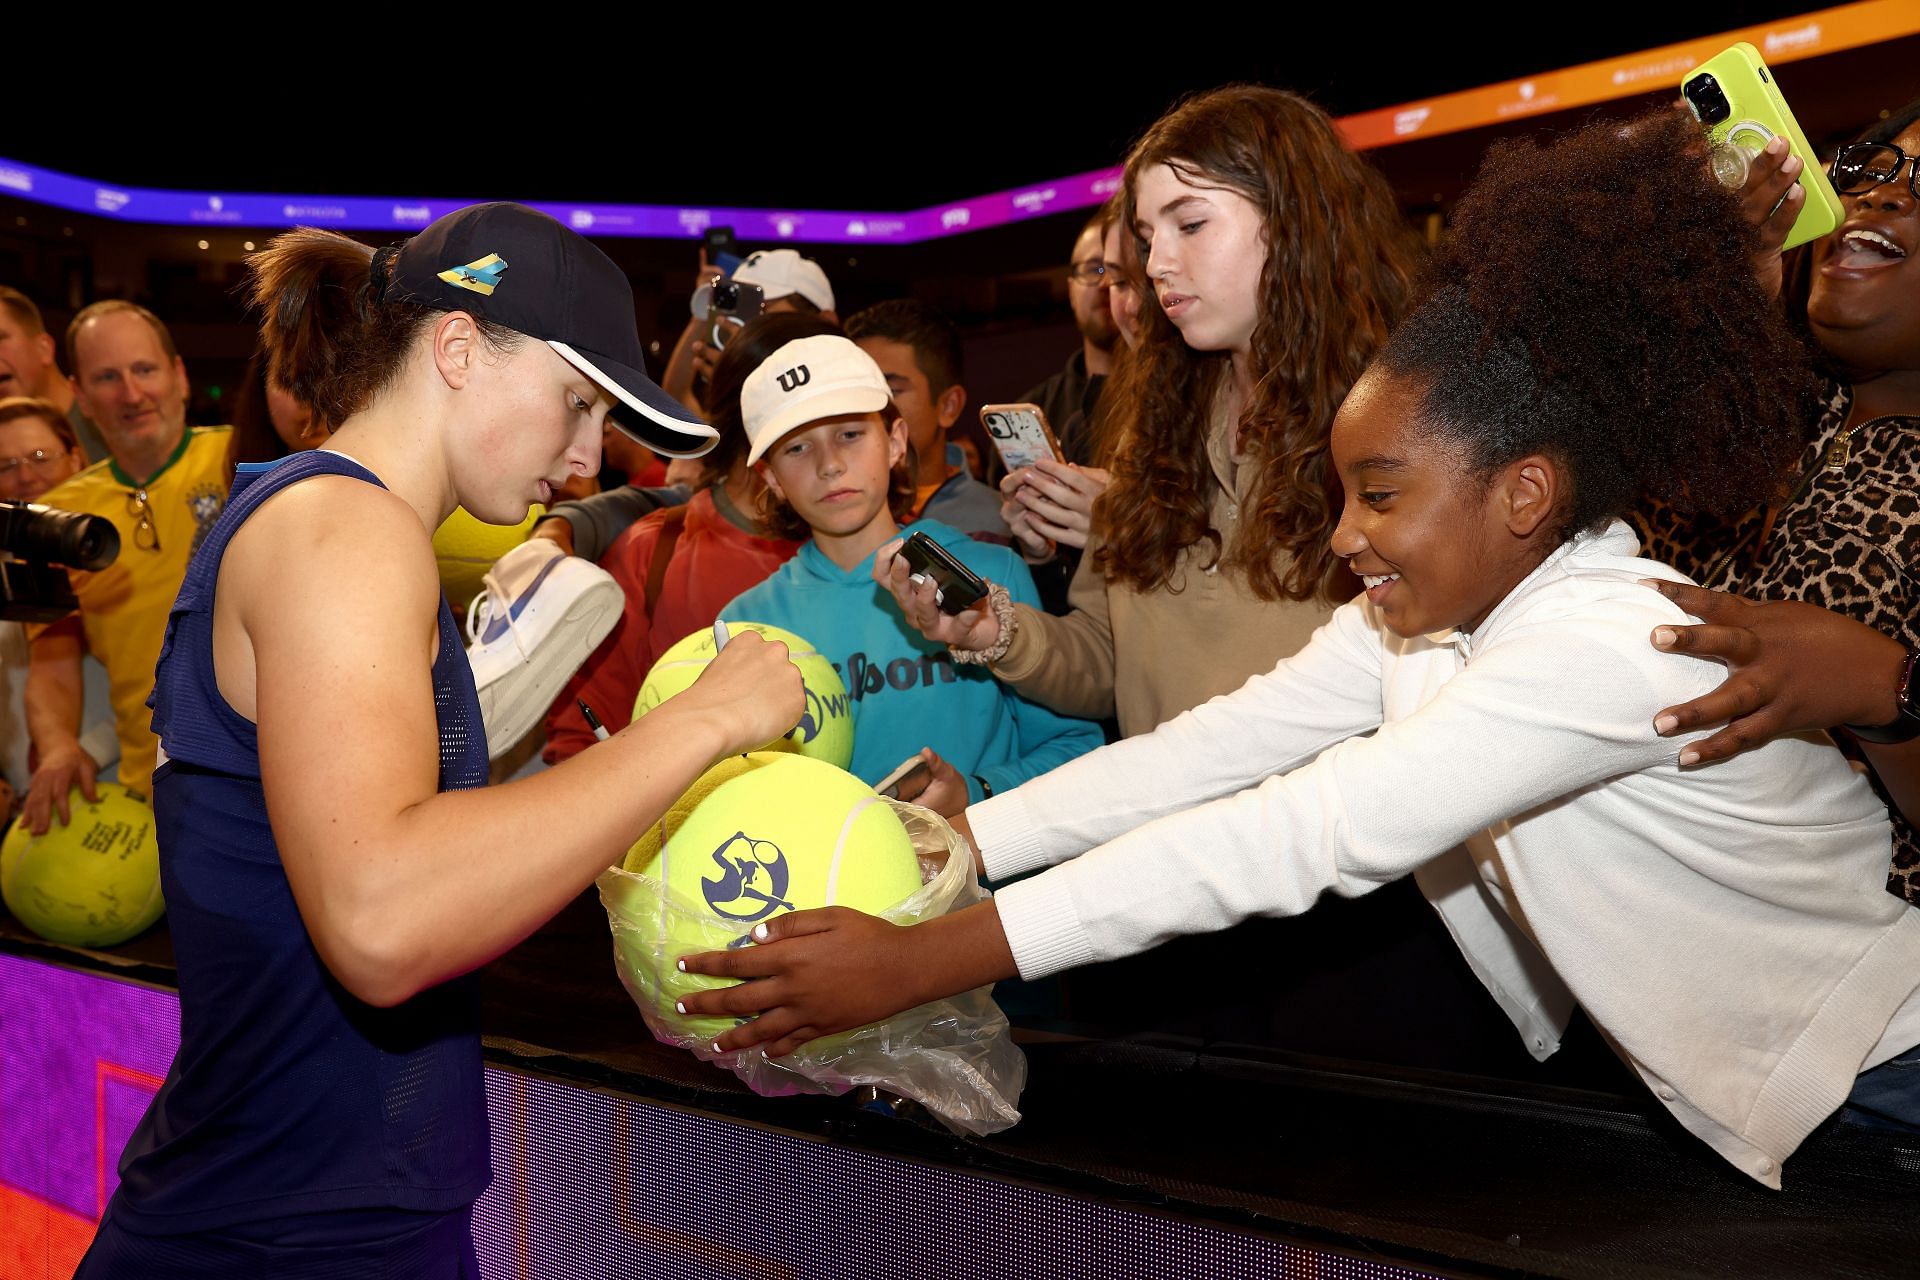 Iga Swiatek signs autographs for fans after defeating Coco Gauff at the 2022 WTA Finals.